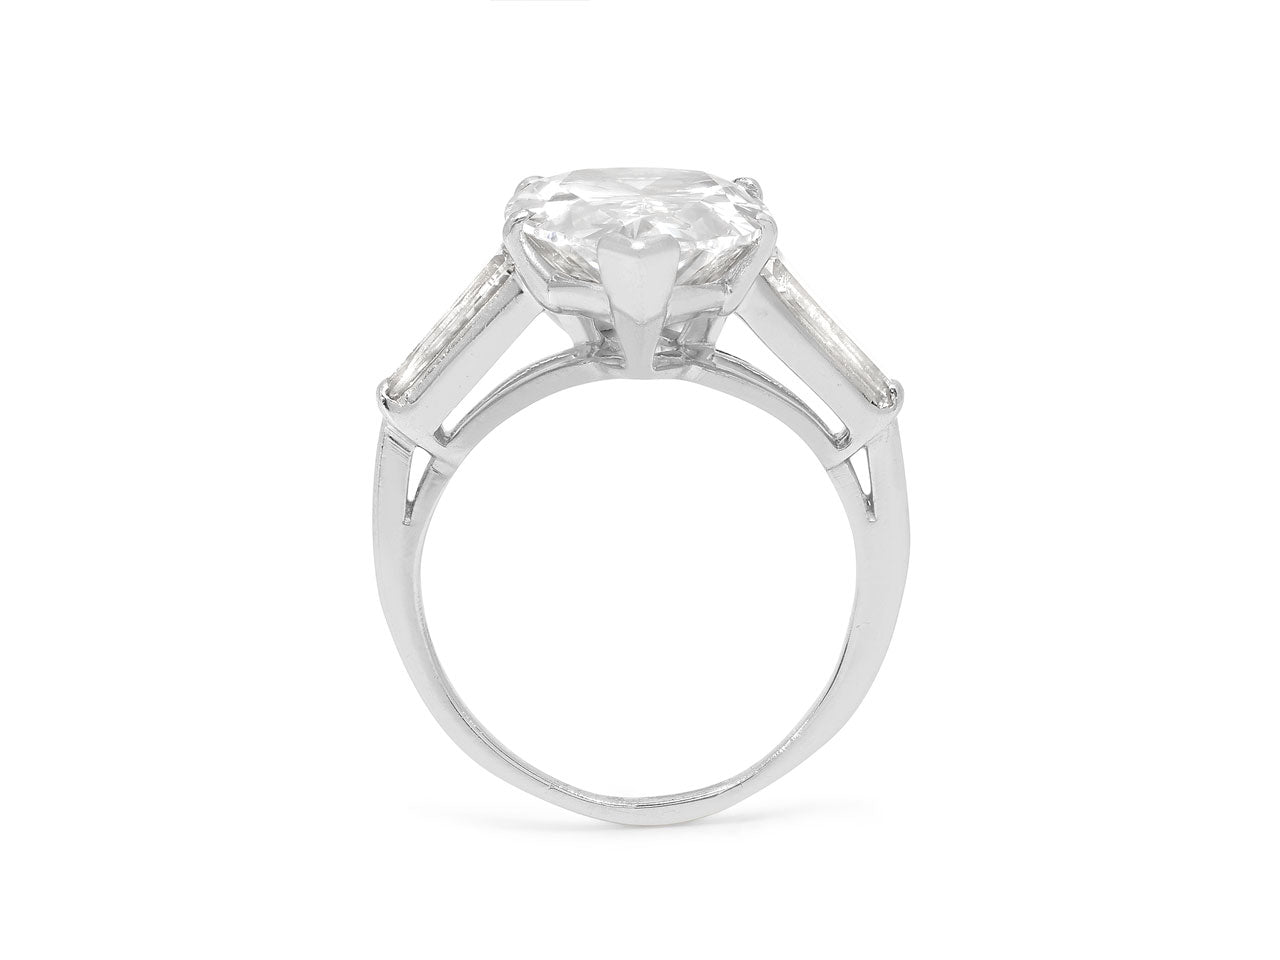 Pear-shape Diamond Ring, 5.76 Carats H/SI2, in Platinum